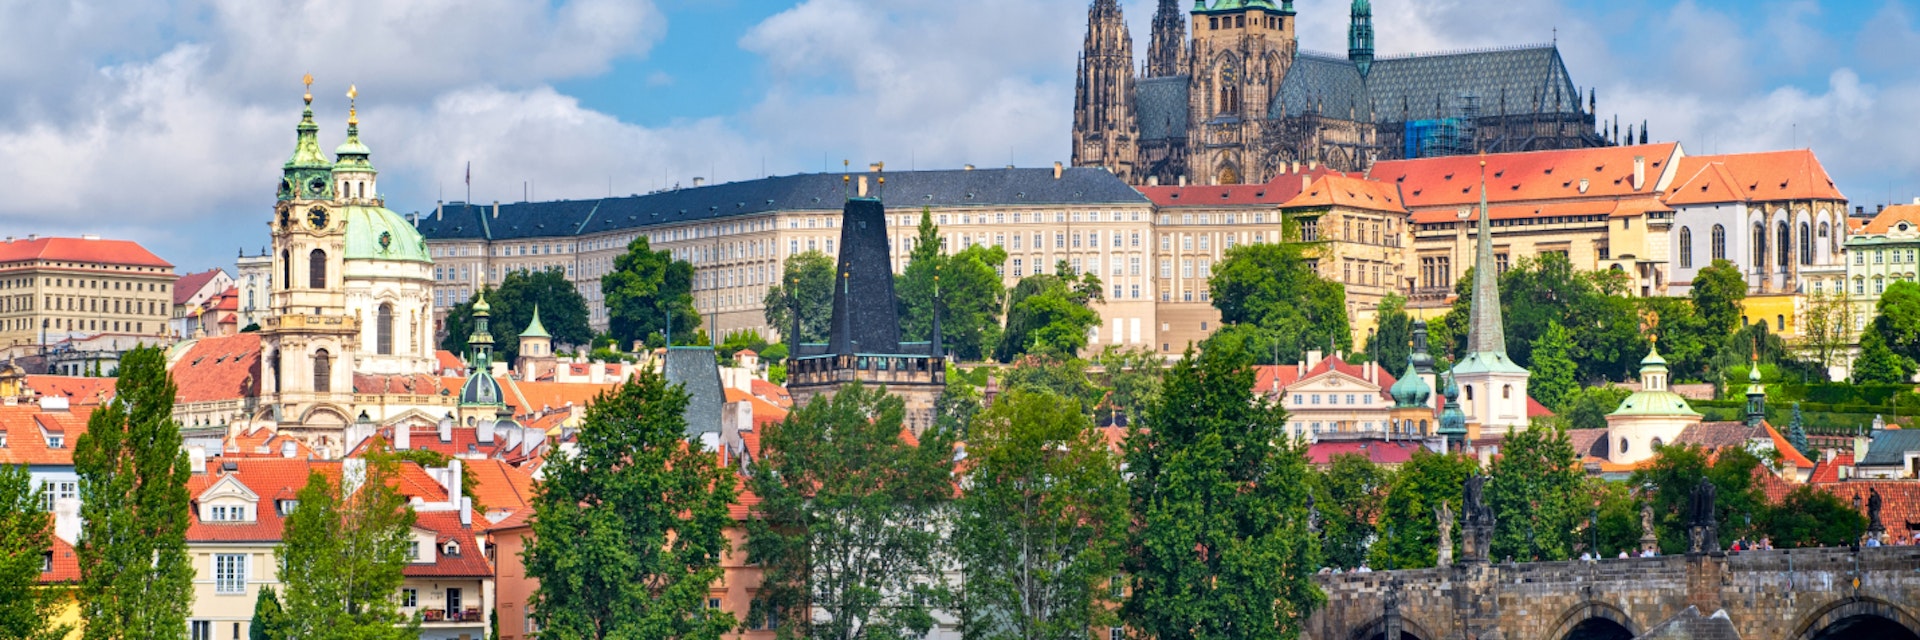 View of Prague castle and Charles Bridge; Shutterstock ID 83097769; Your name (First / Last): Gemma Graham; GL account no.: 65050; Netsuite department name: Online Editorial; Full Product or Project name including edition: POI imagery for LP.com